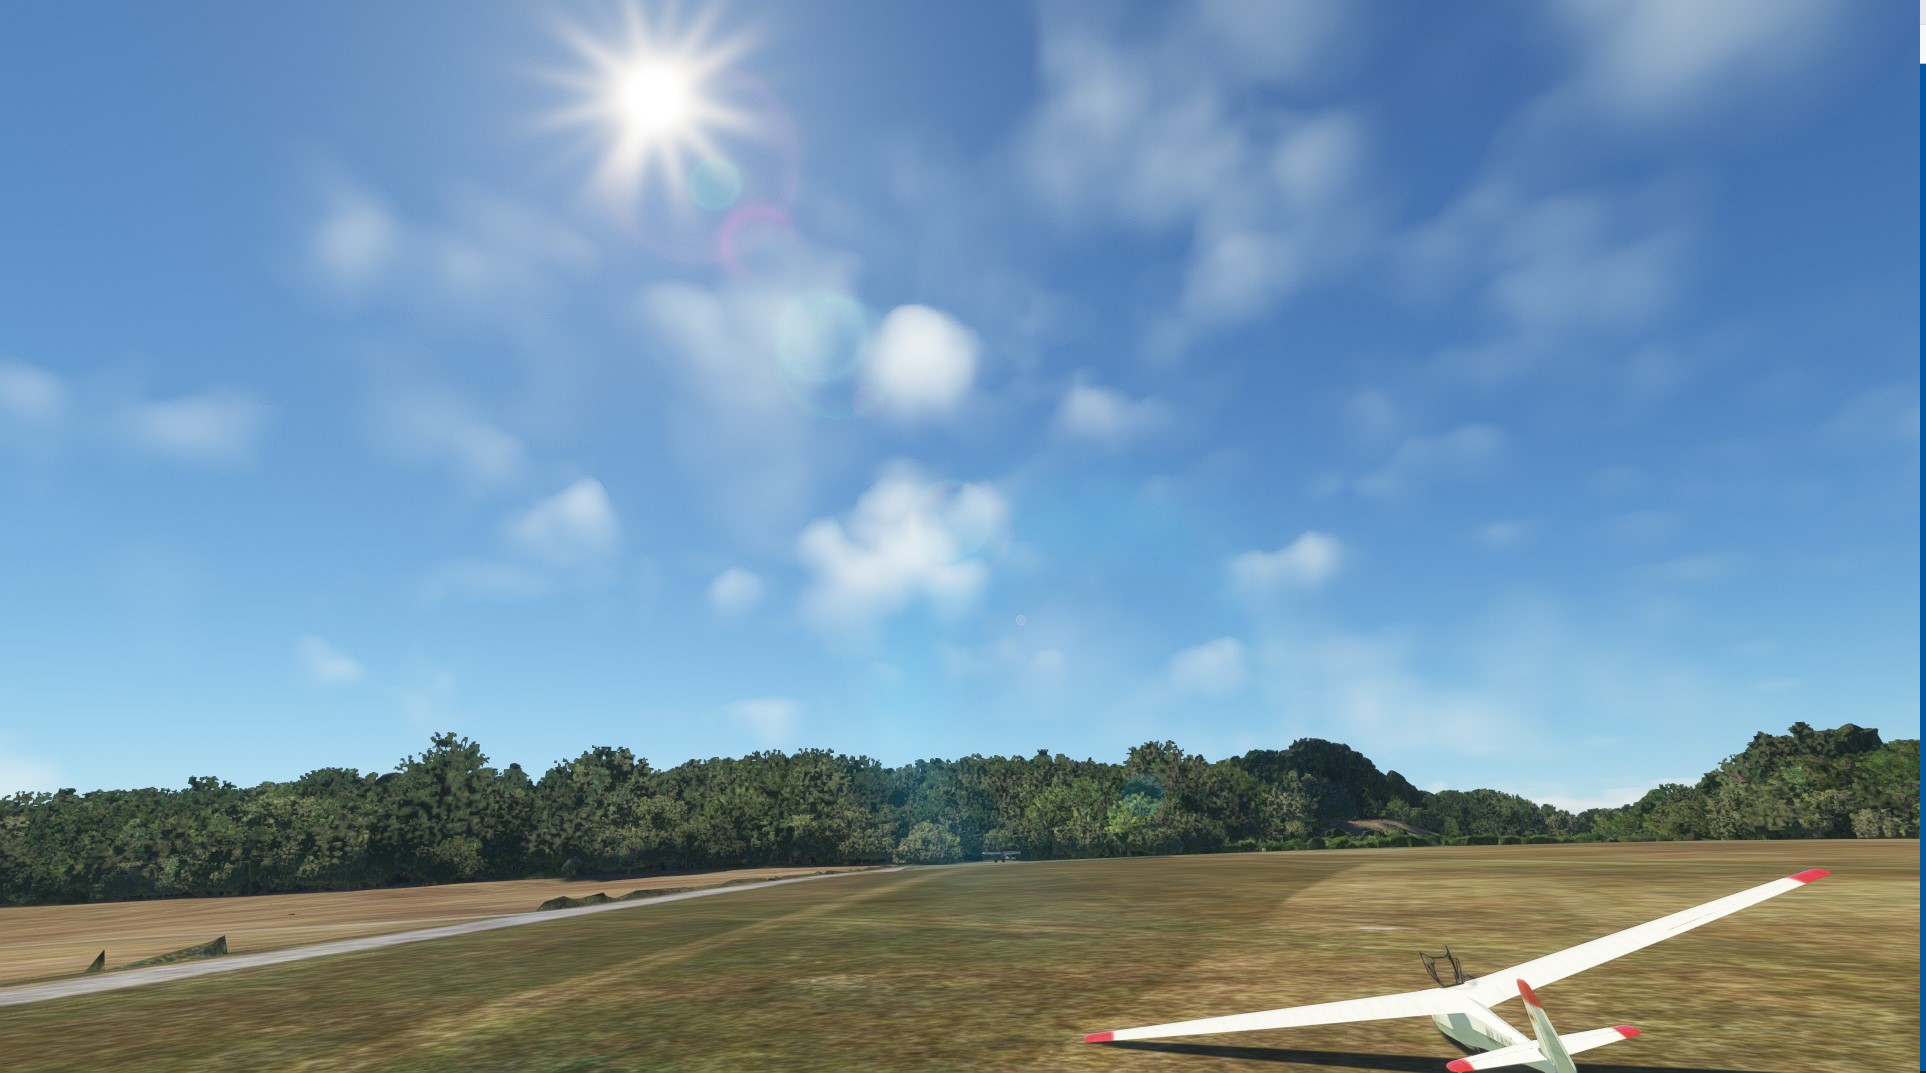 More Microsoft Flight Simulator 2024 details, including graphics and  physics improvements - Neowin